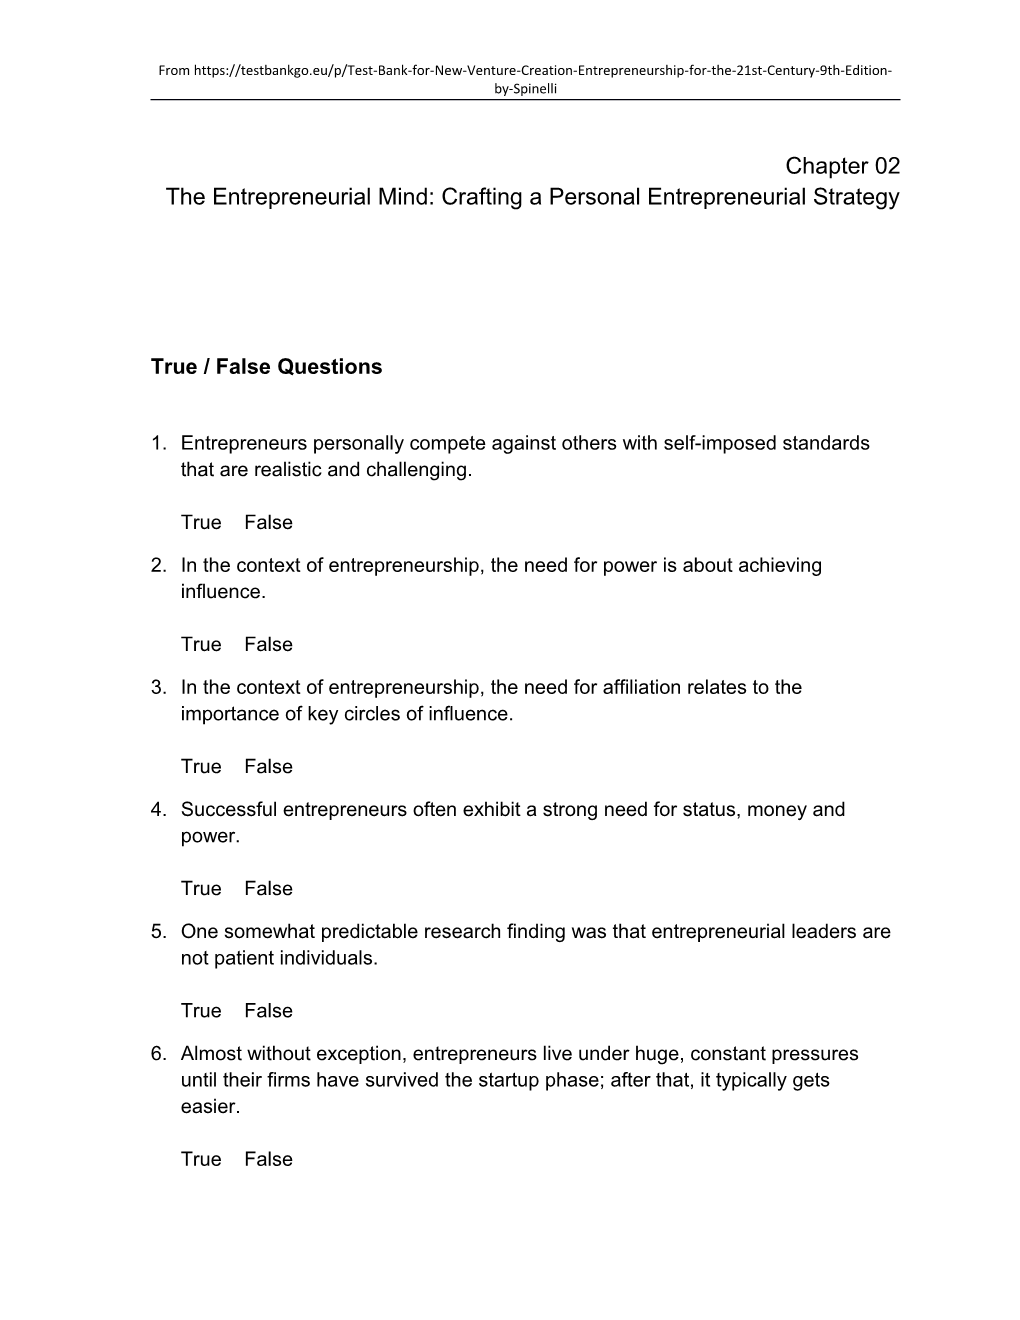 Chapter 02 the Entrepreneurial Mind: Crafting a Personal Entrepreneurial Strategy